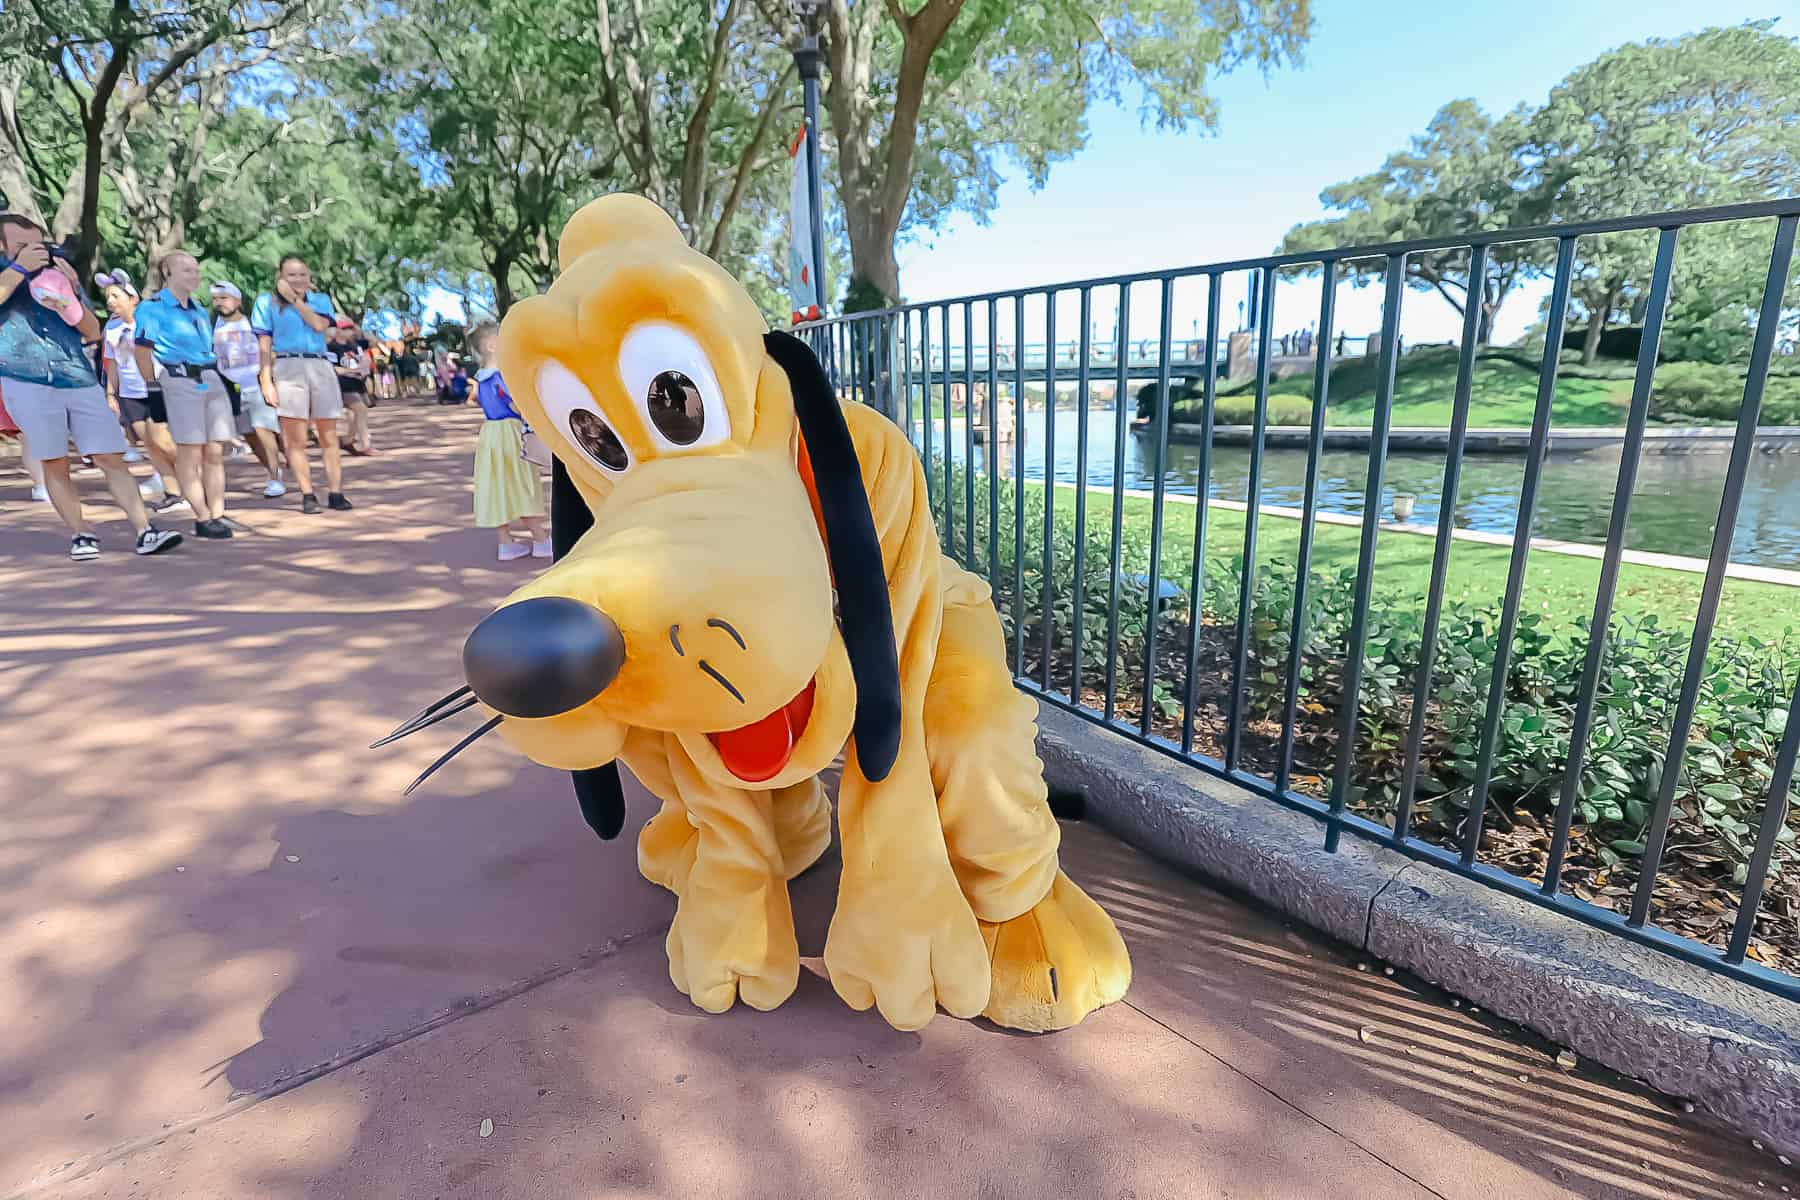 Pluto bowed down like a puppy dog.